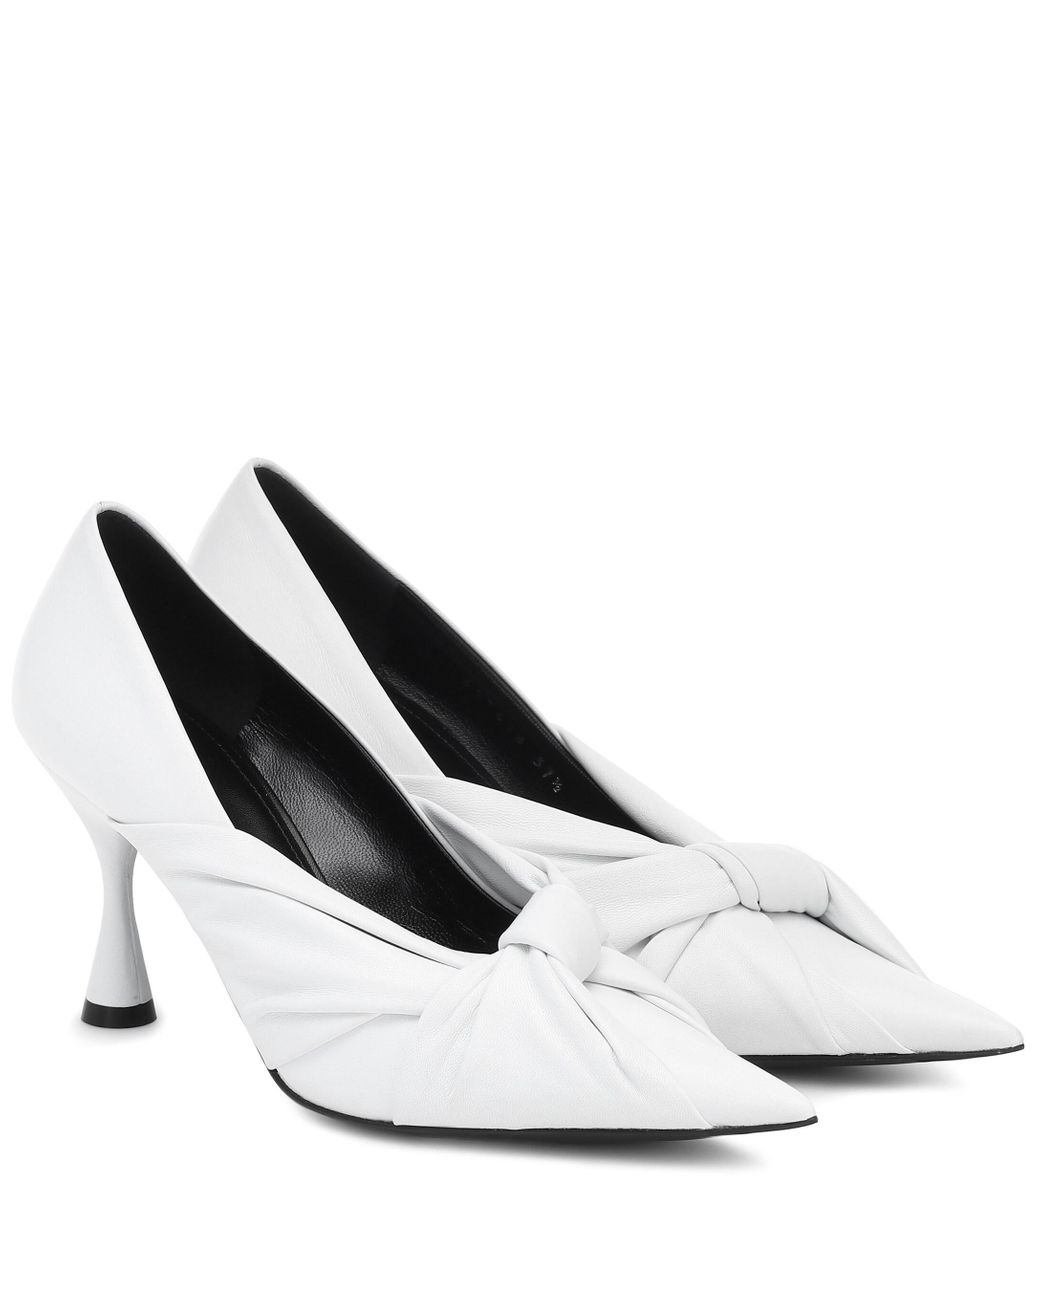 Balenciaga Drapy Leather Pumps in White - Lyst